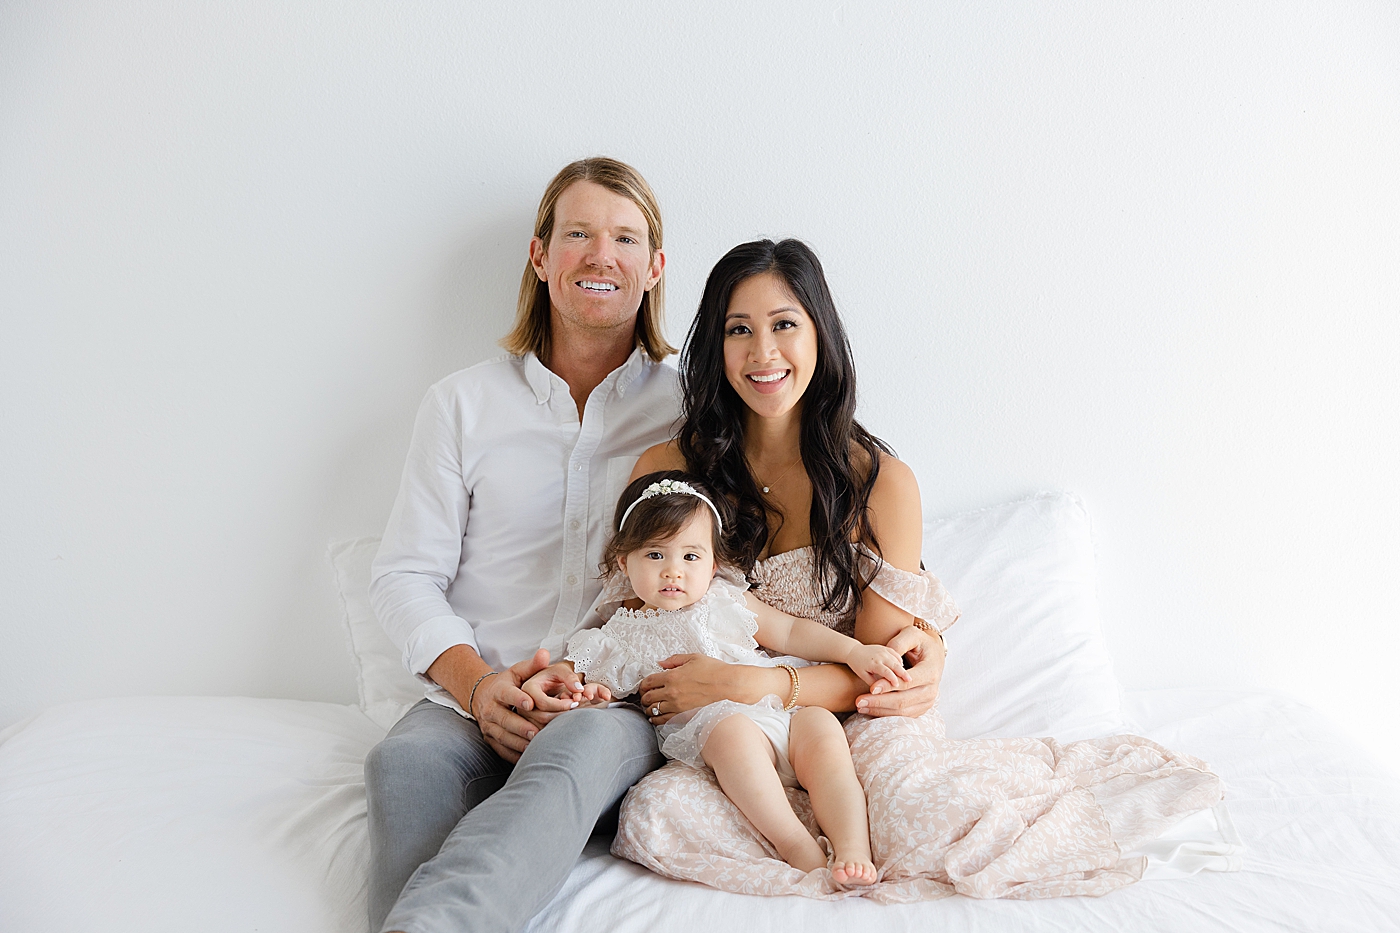 Mom dad and baby girl smiling sitting together on a bed | Image by Sana Ahmed Photography